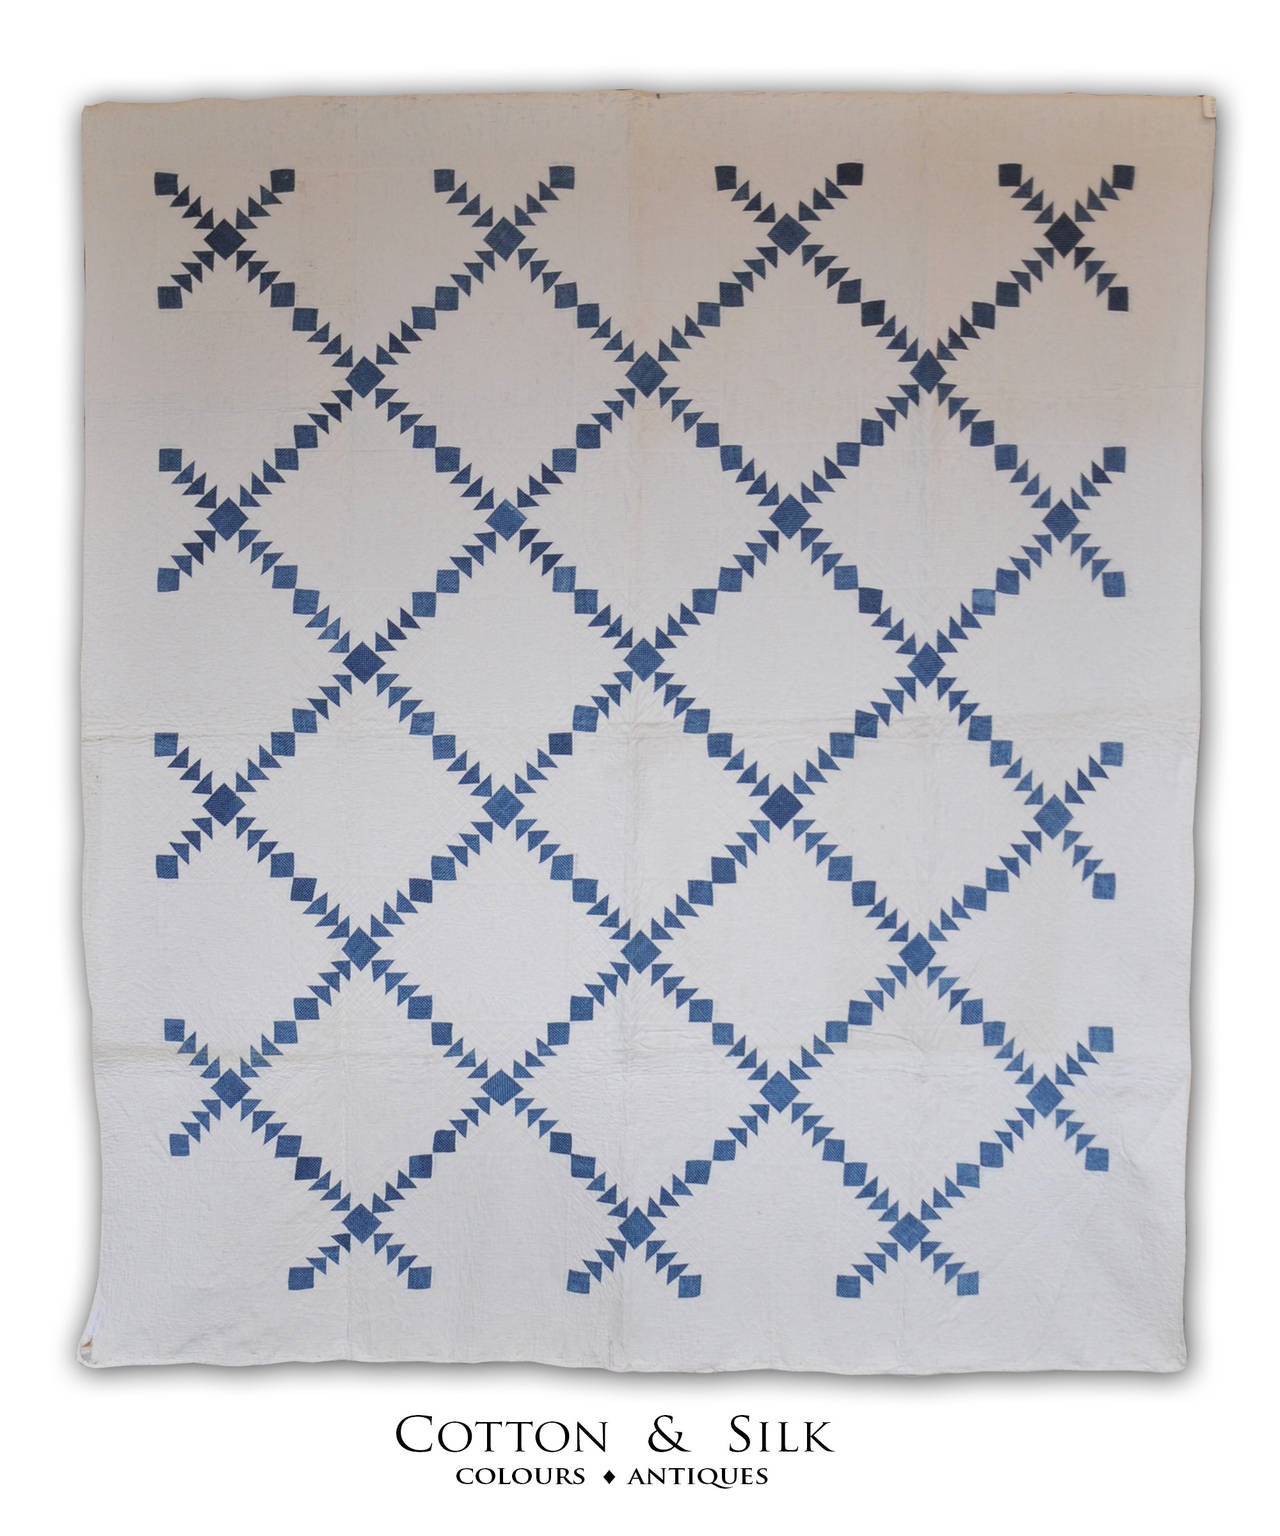 A beautiful  antique  indigo on white quilt with a surprising modern look.